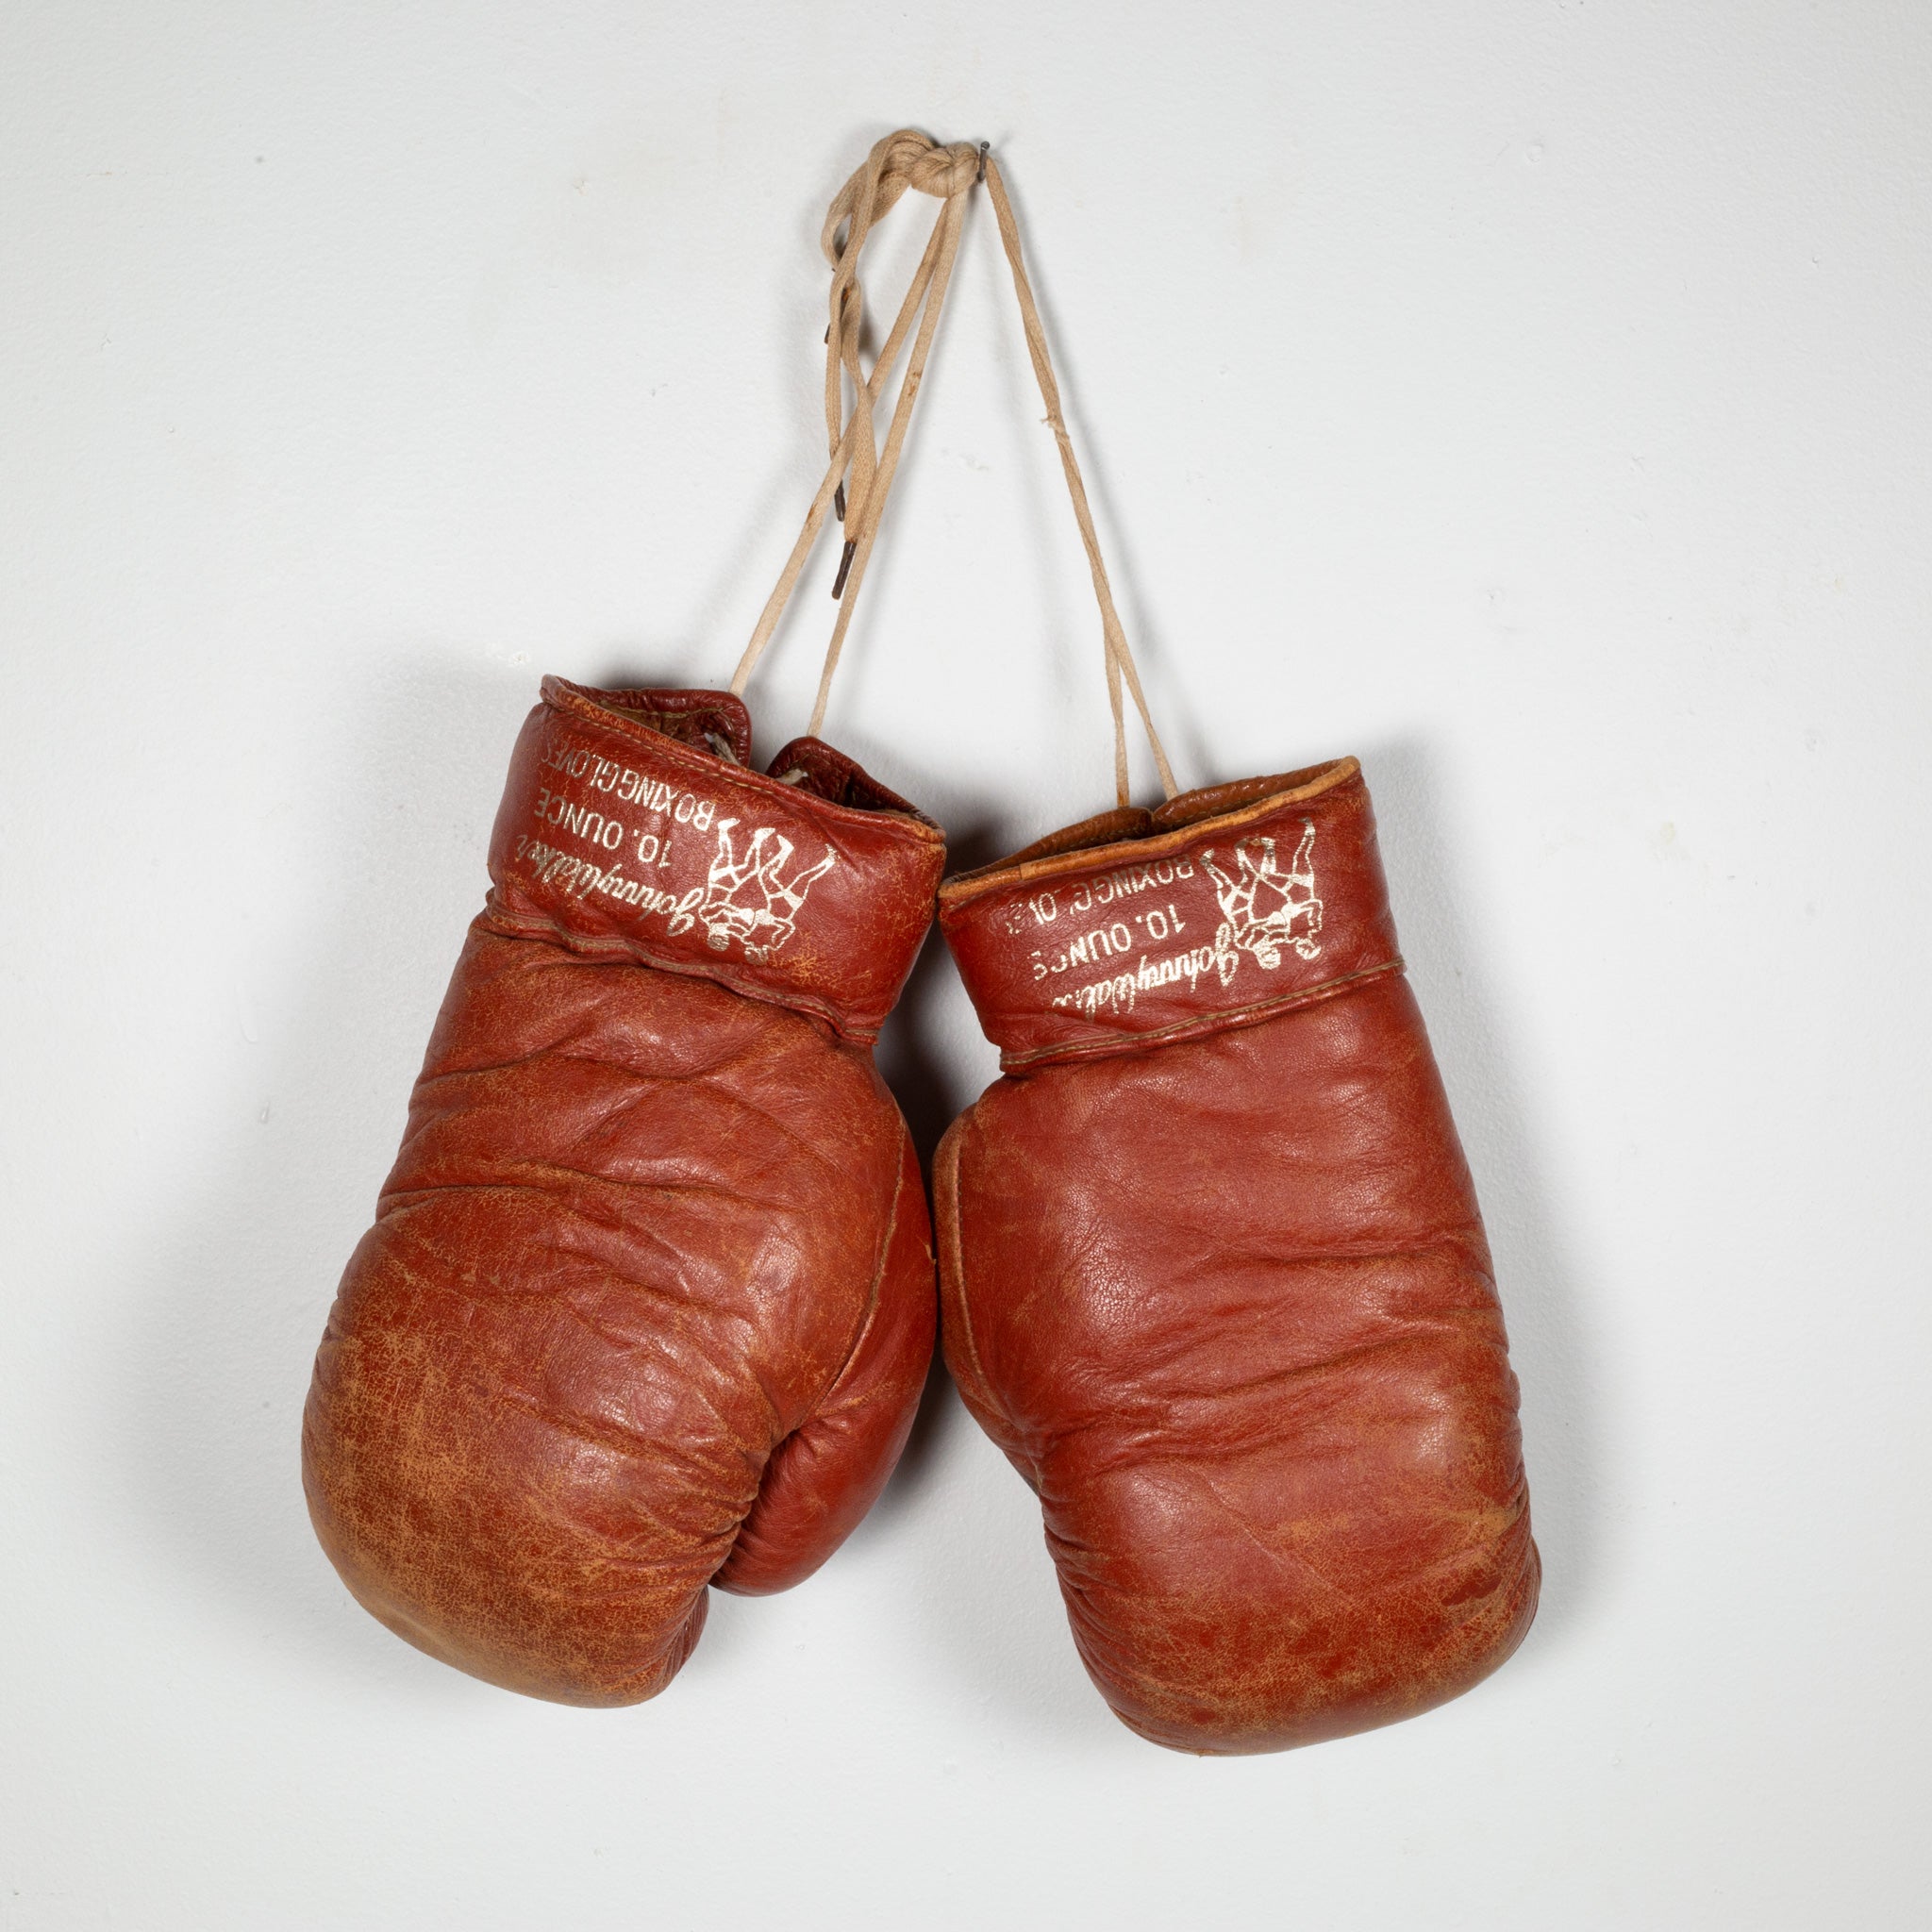 Roll With the Punches #1 Boxing Gloves by JC Rivera – ALL STAR PRESS